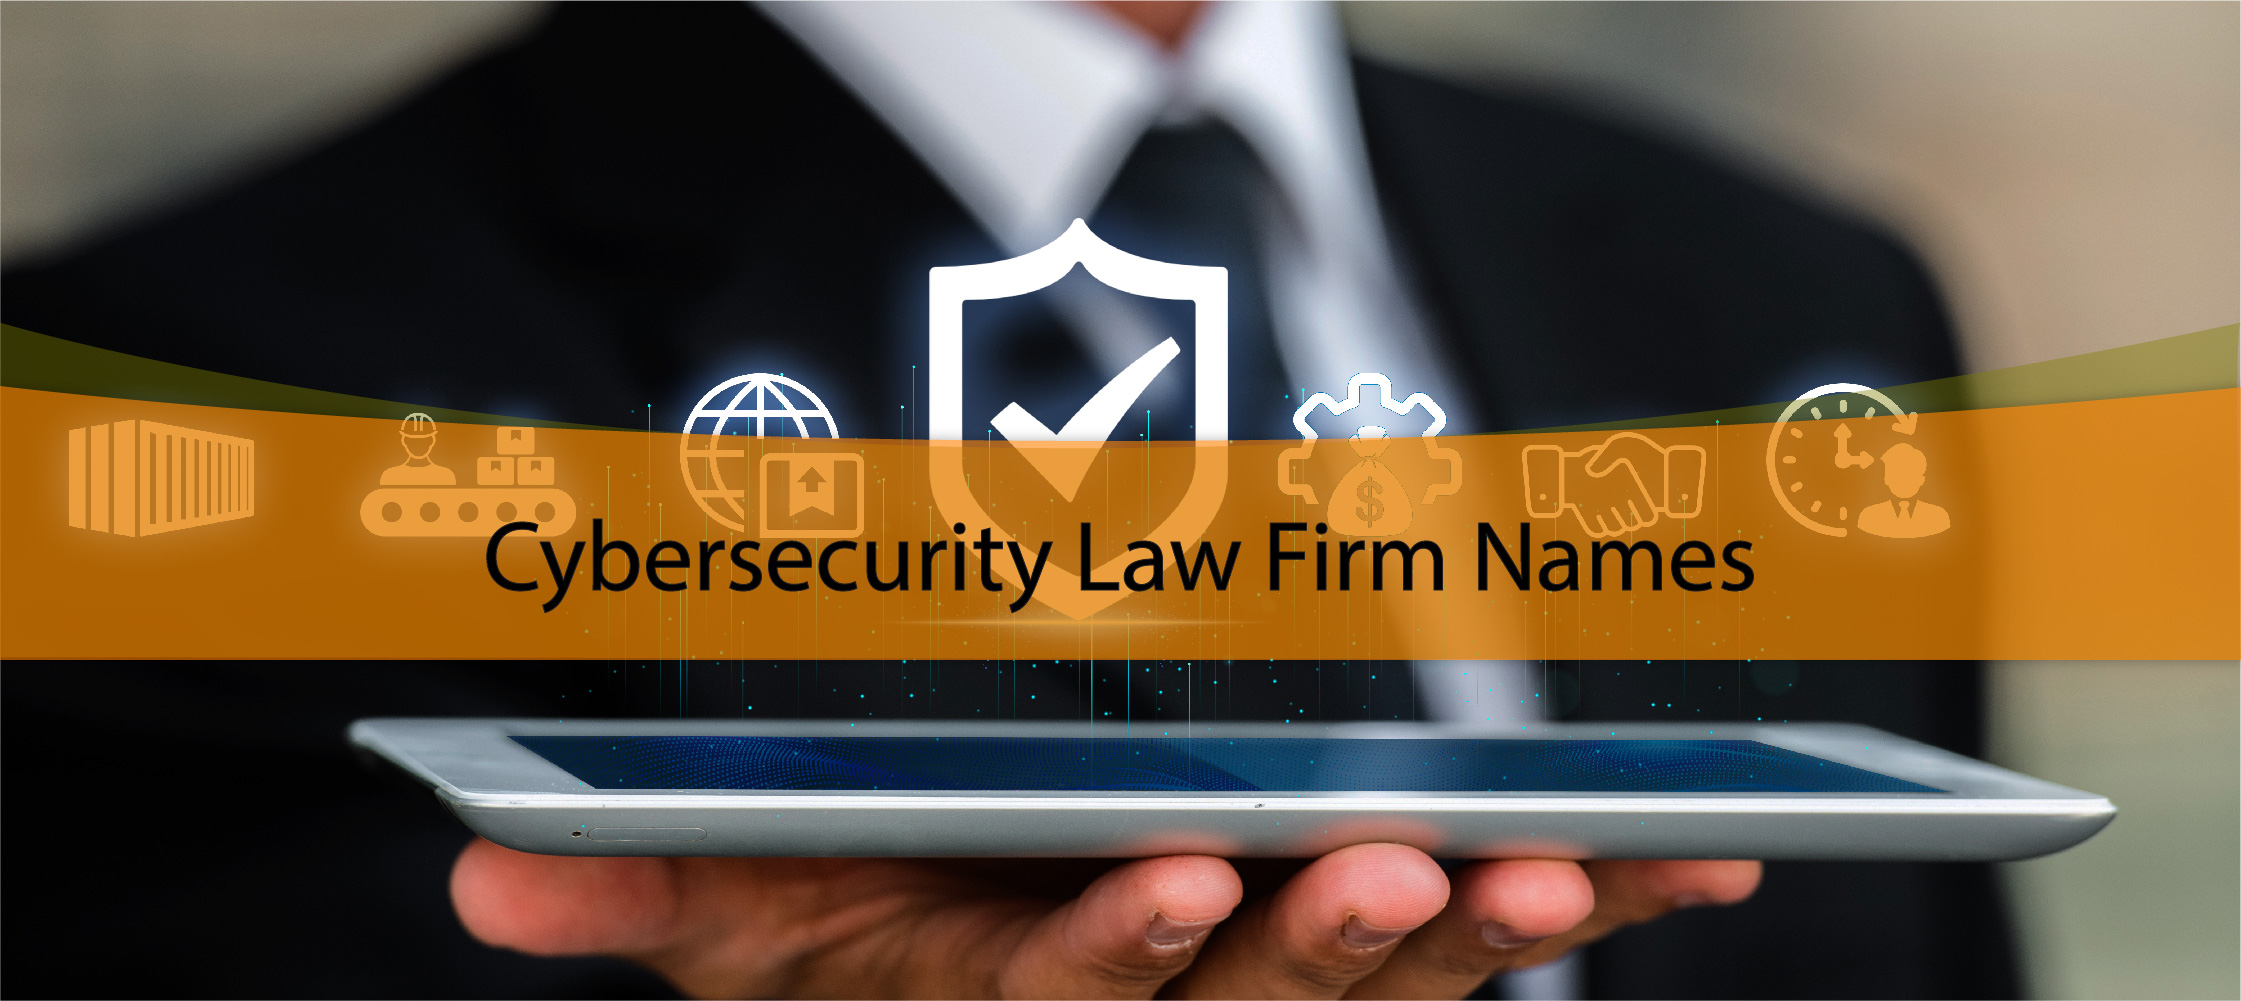 Cybersecurity Law Firm Names